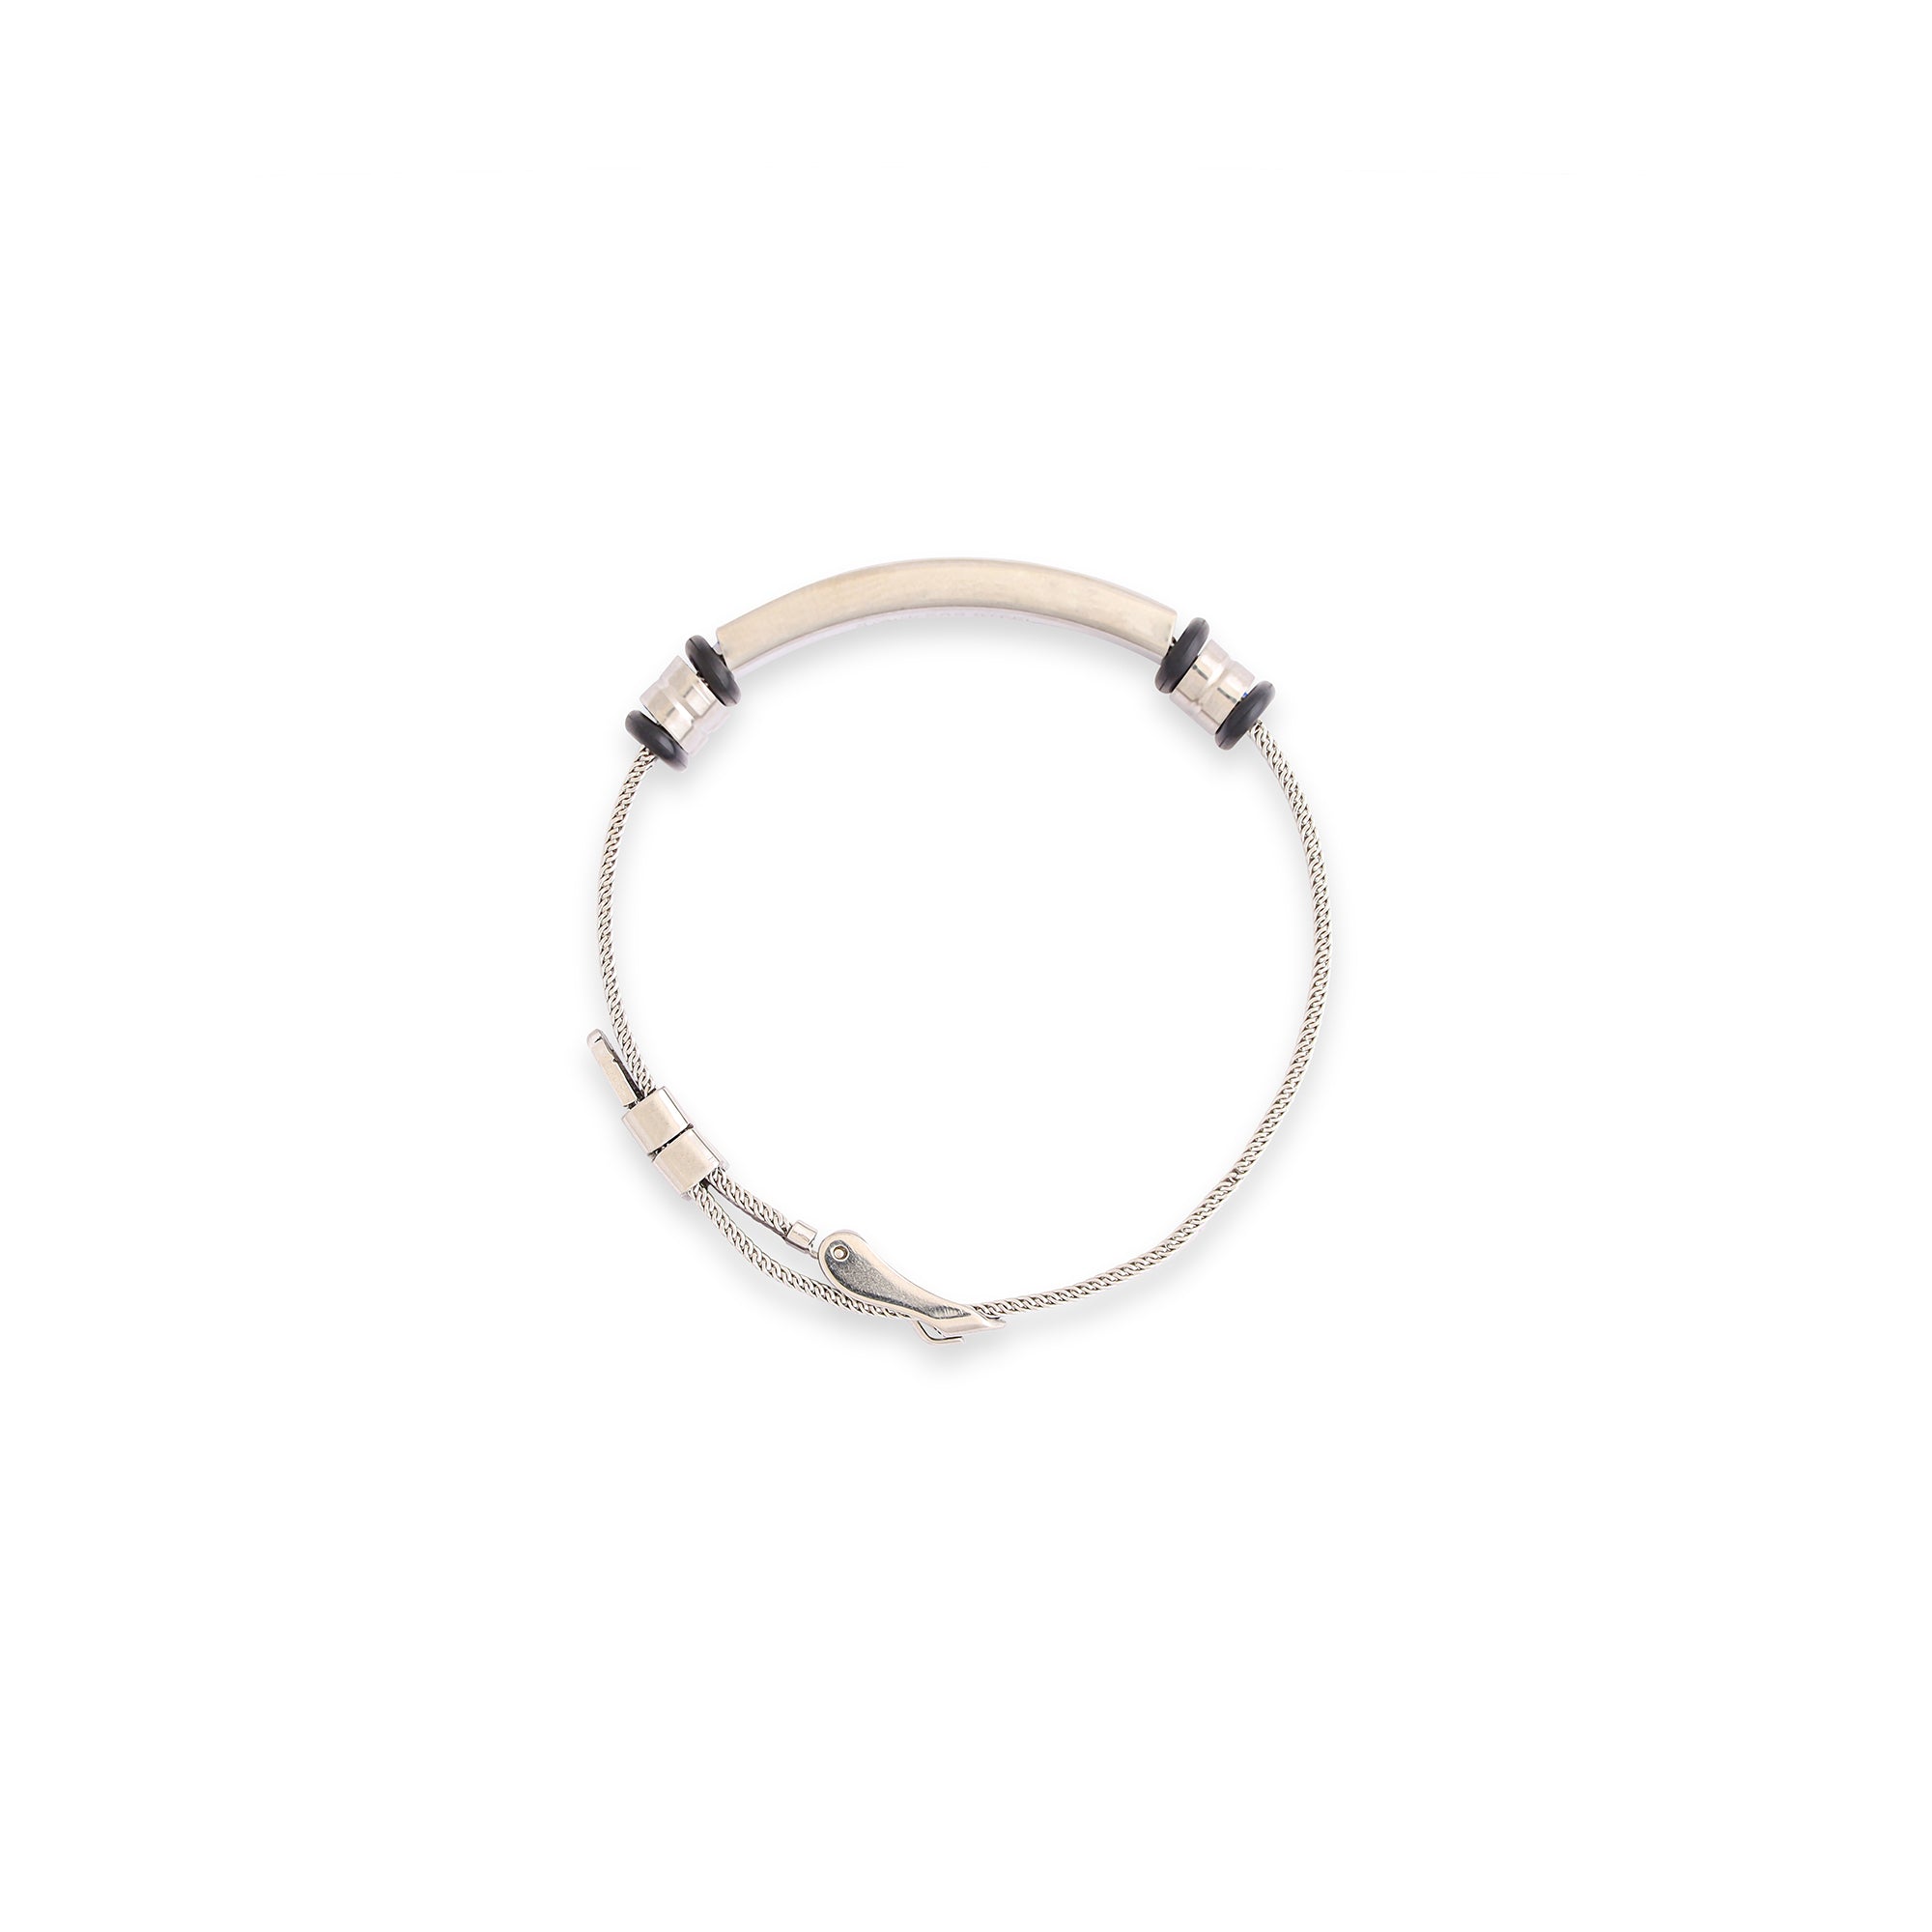 Silver Band Bracelet with cross